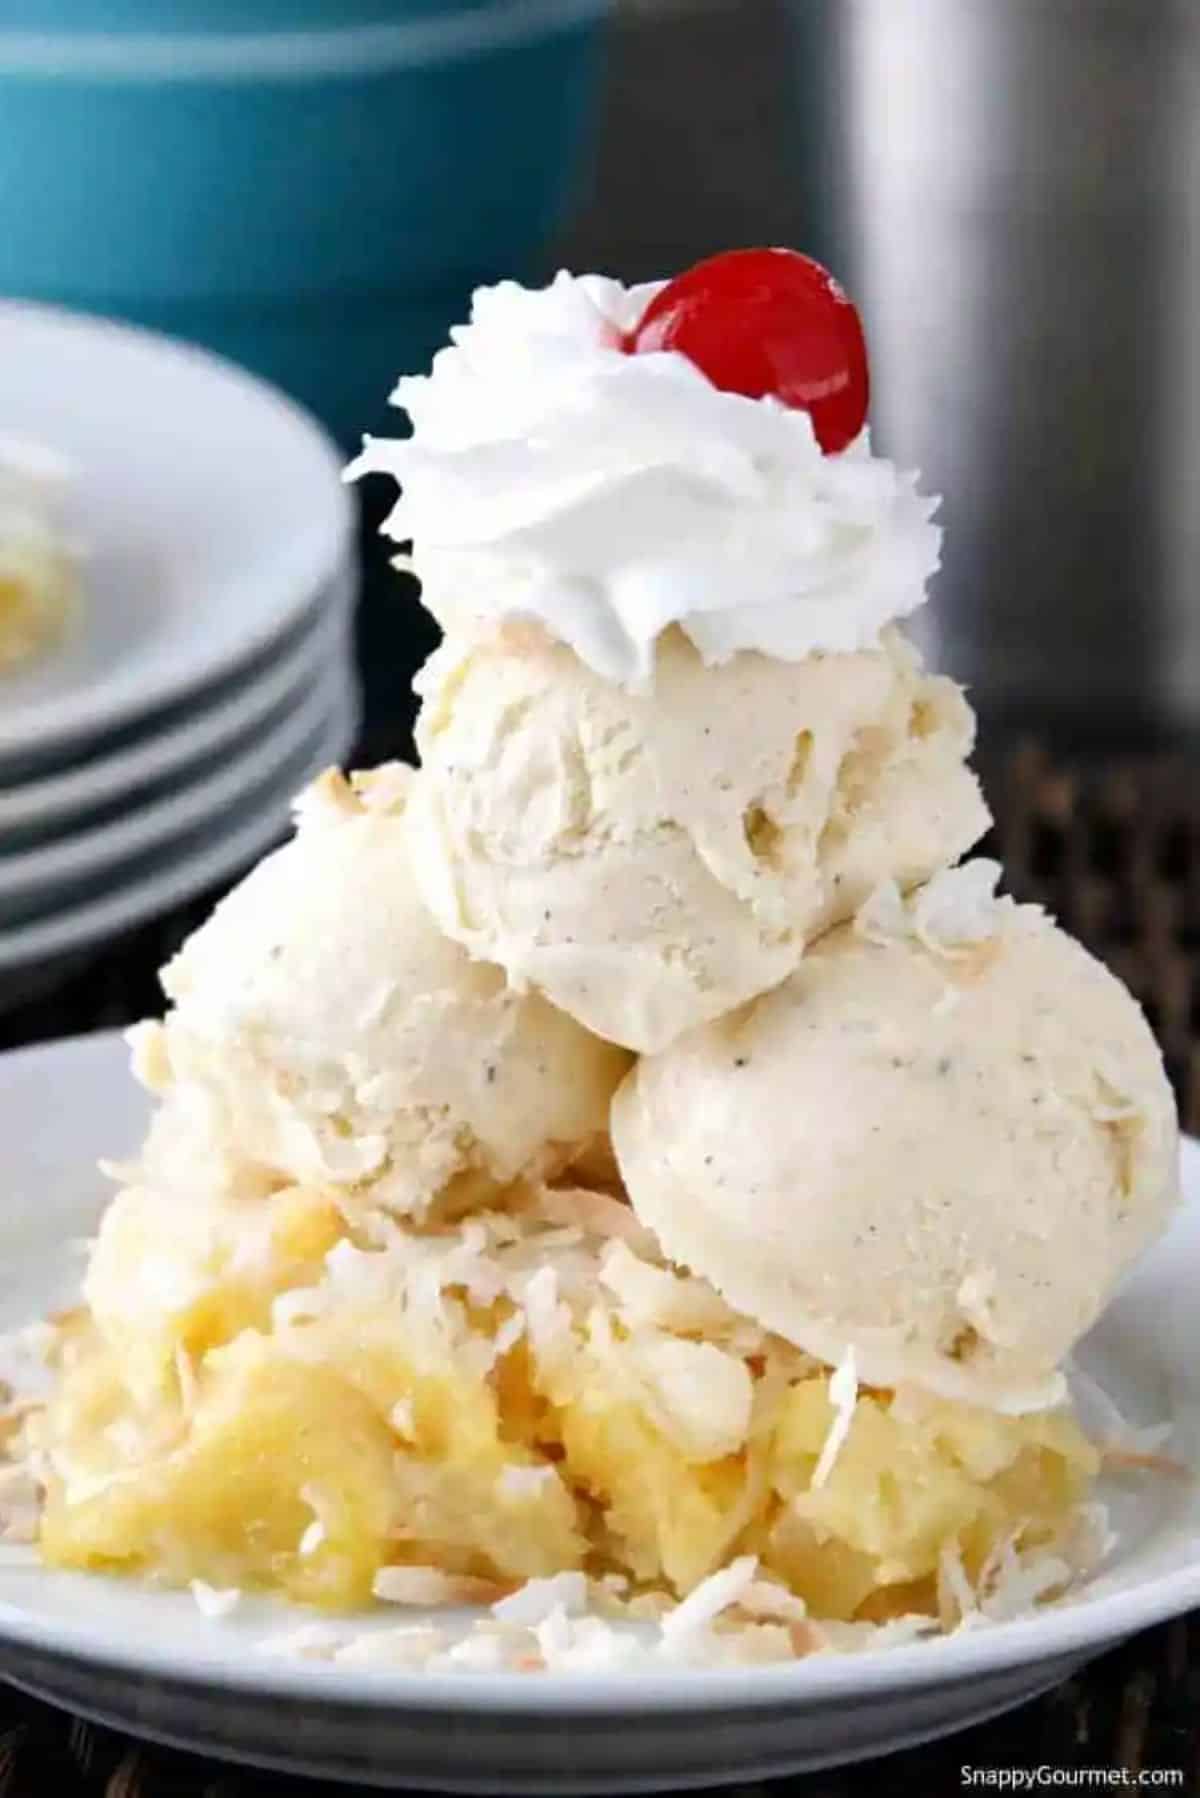 Delicious tropical piña colada dump cake garnished with ice cream on a white plate.